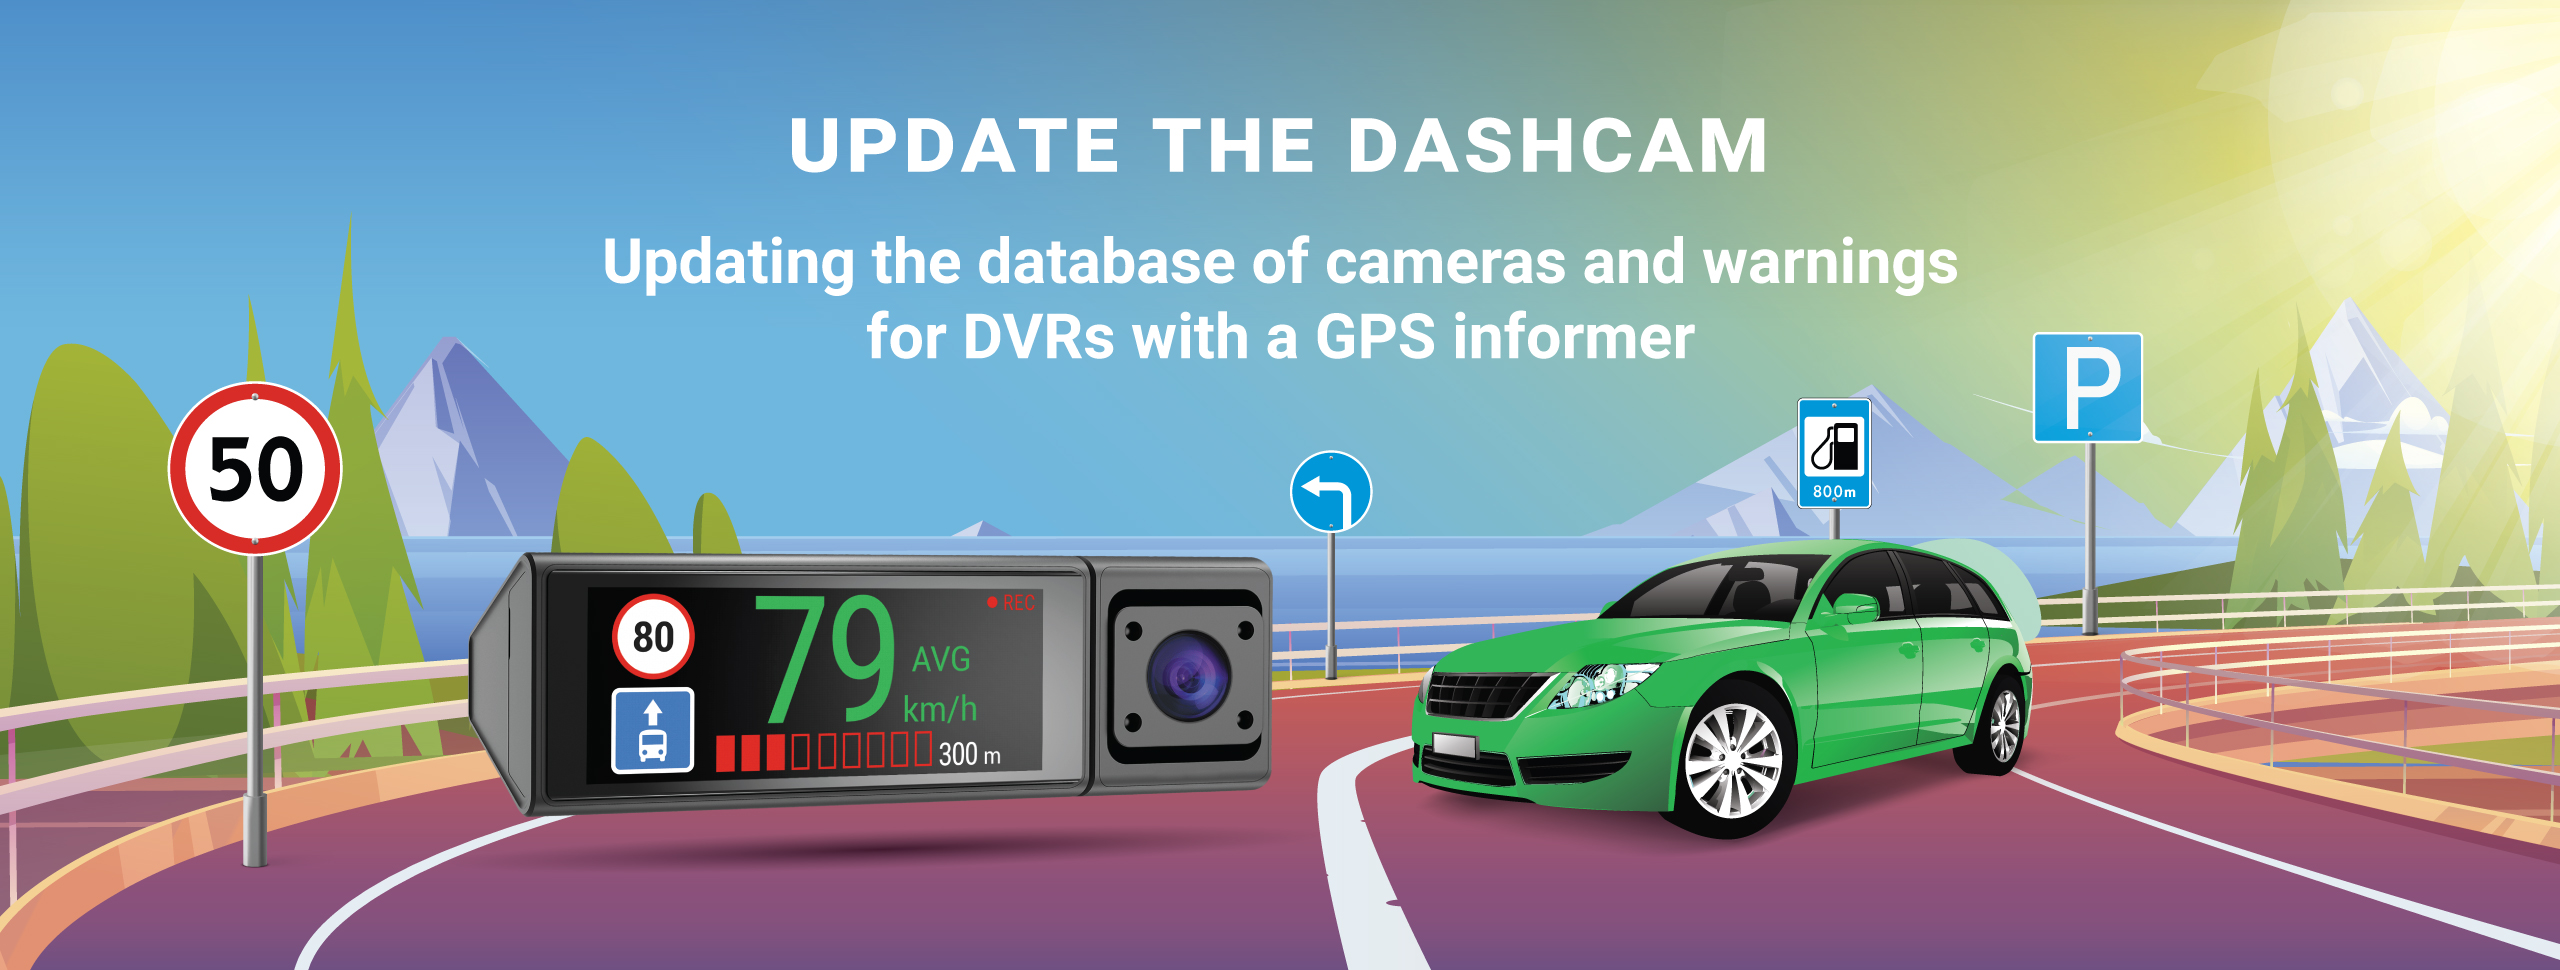 Updating the database of cameras and warnings for DVRs with a GPS informer